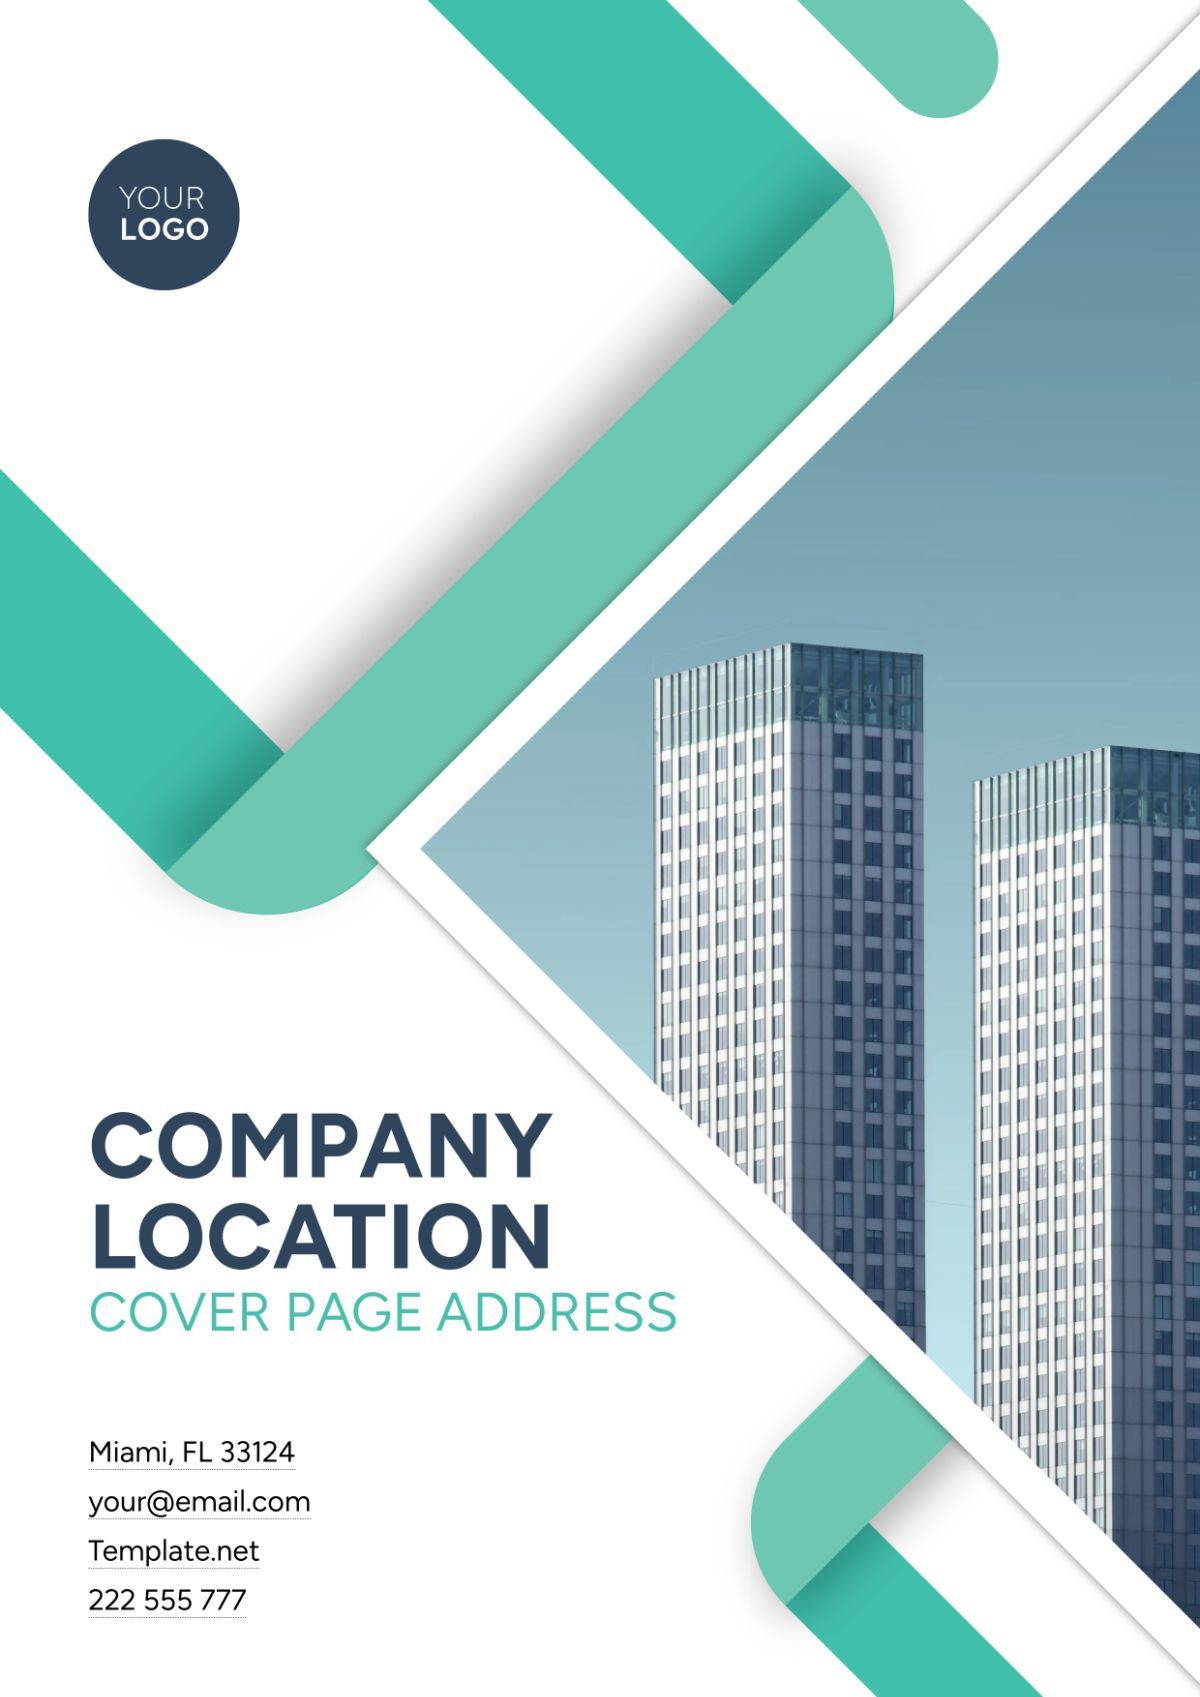 Company Location Cover Page Address